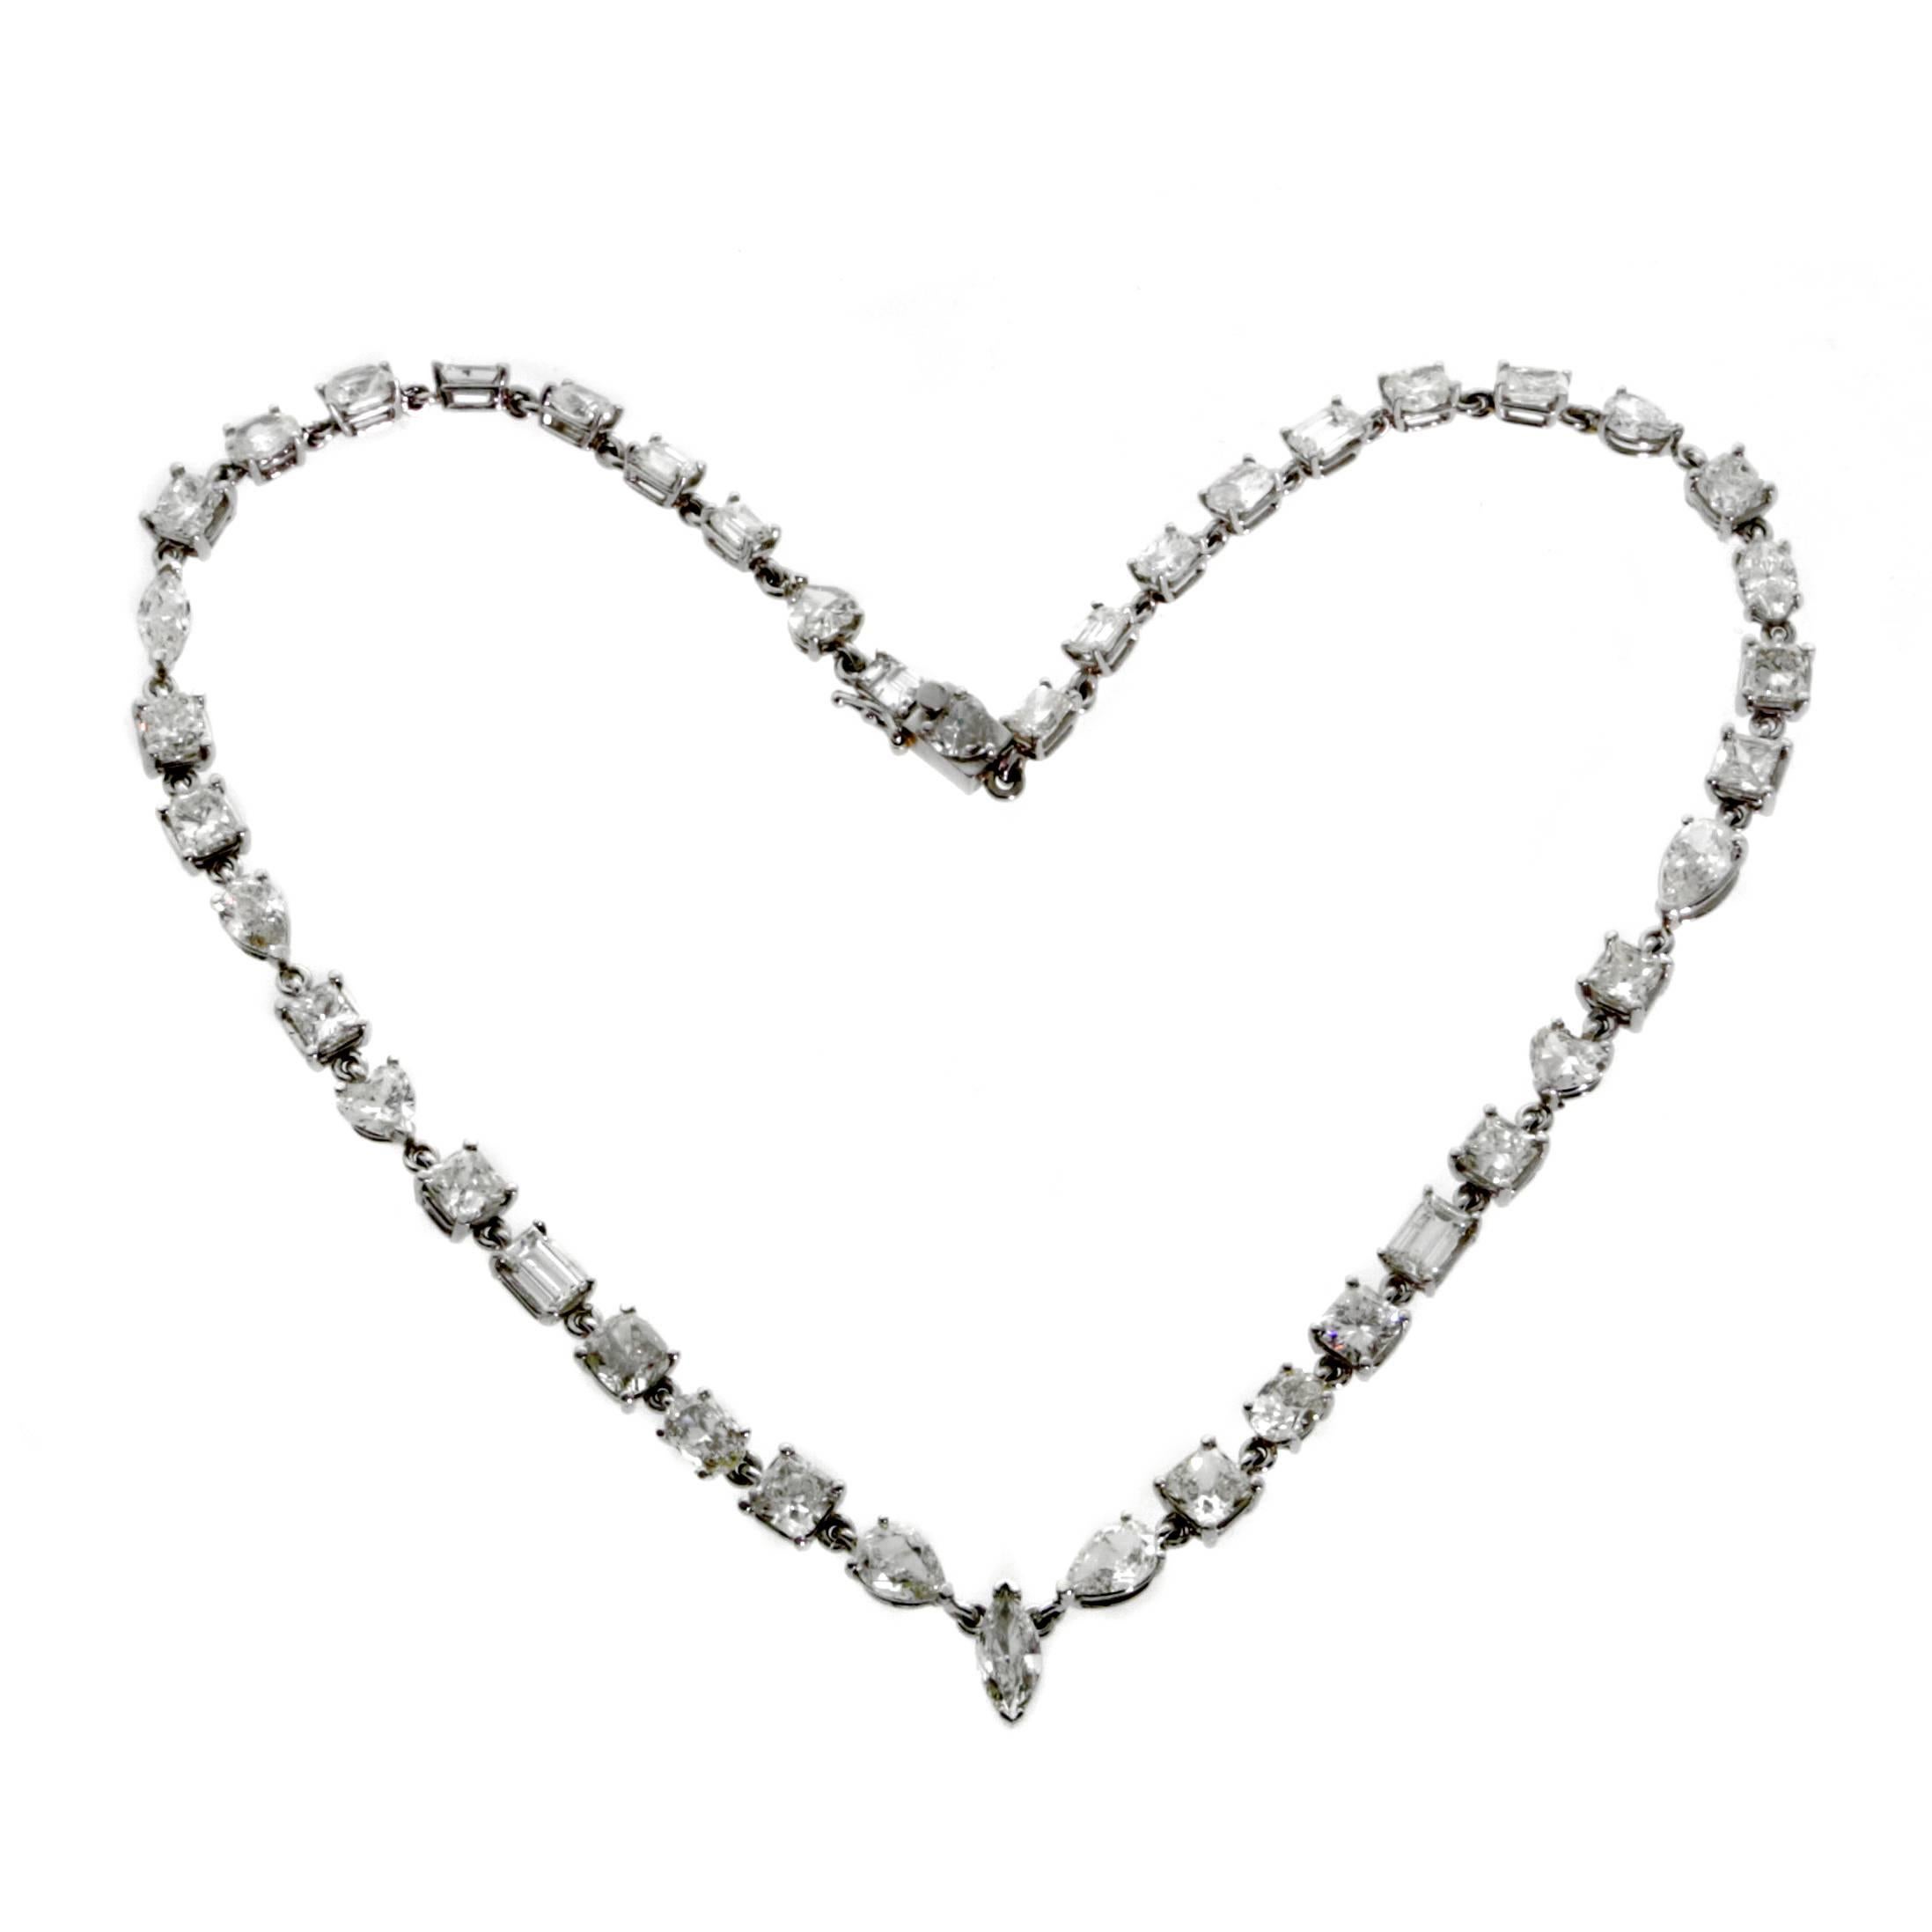 A plethora of diamonds set in platinum, this fine necklace features multi-shaped diamonds for an exciting look. The necklace features a stunning 31cts of diamonds and has a length of 16